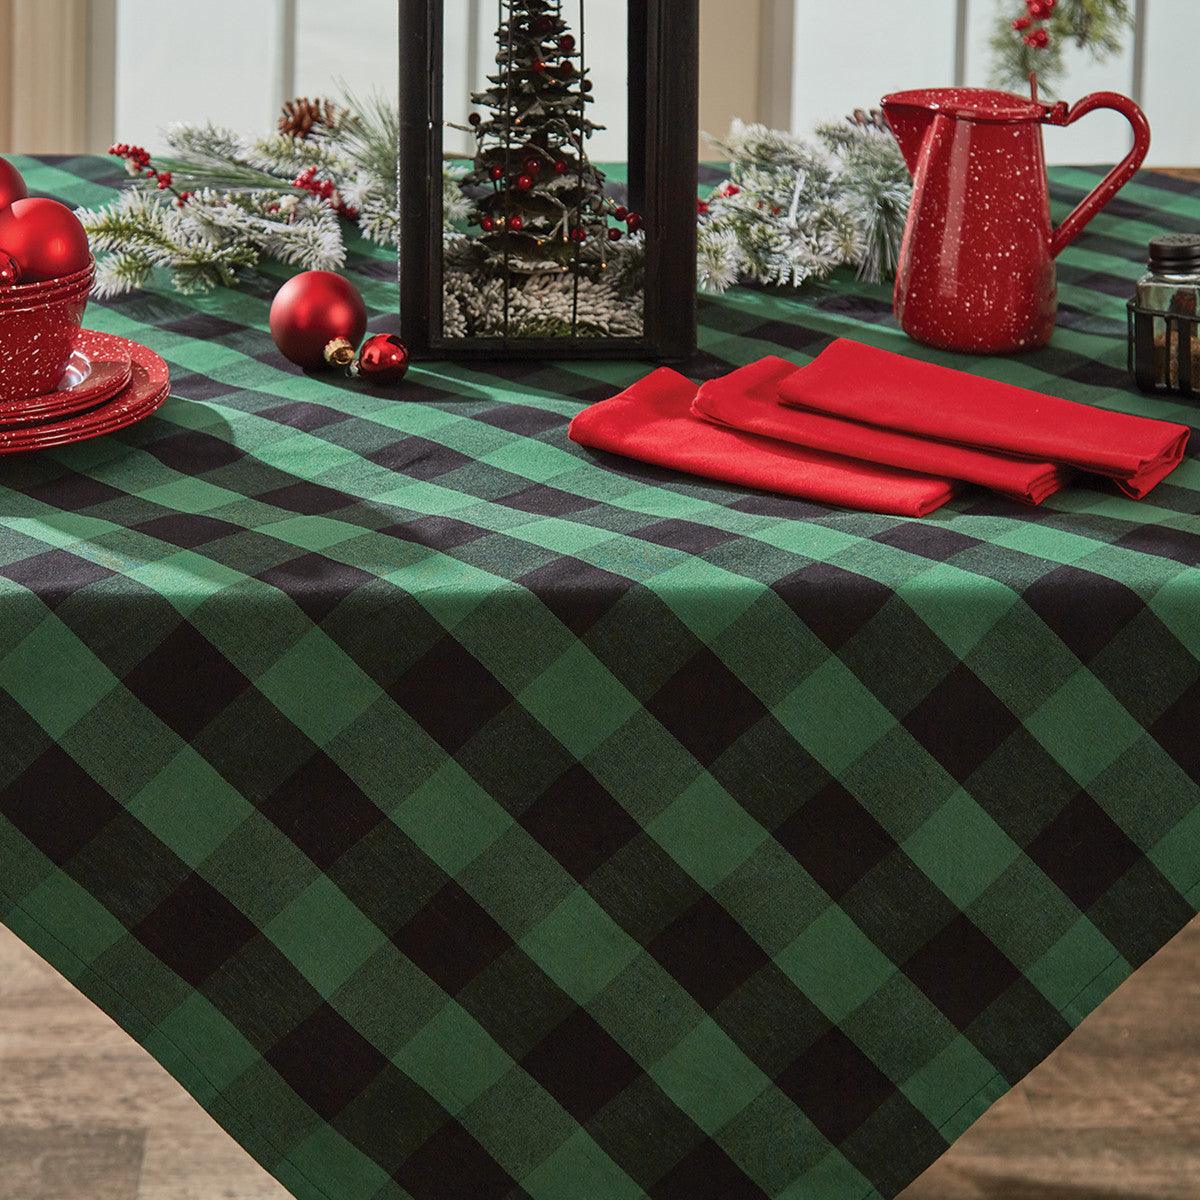 Wicklow Check Tablecloth - Forest Park Designs - The Fox Decor